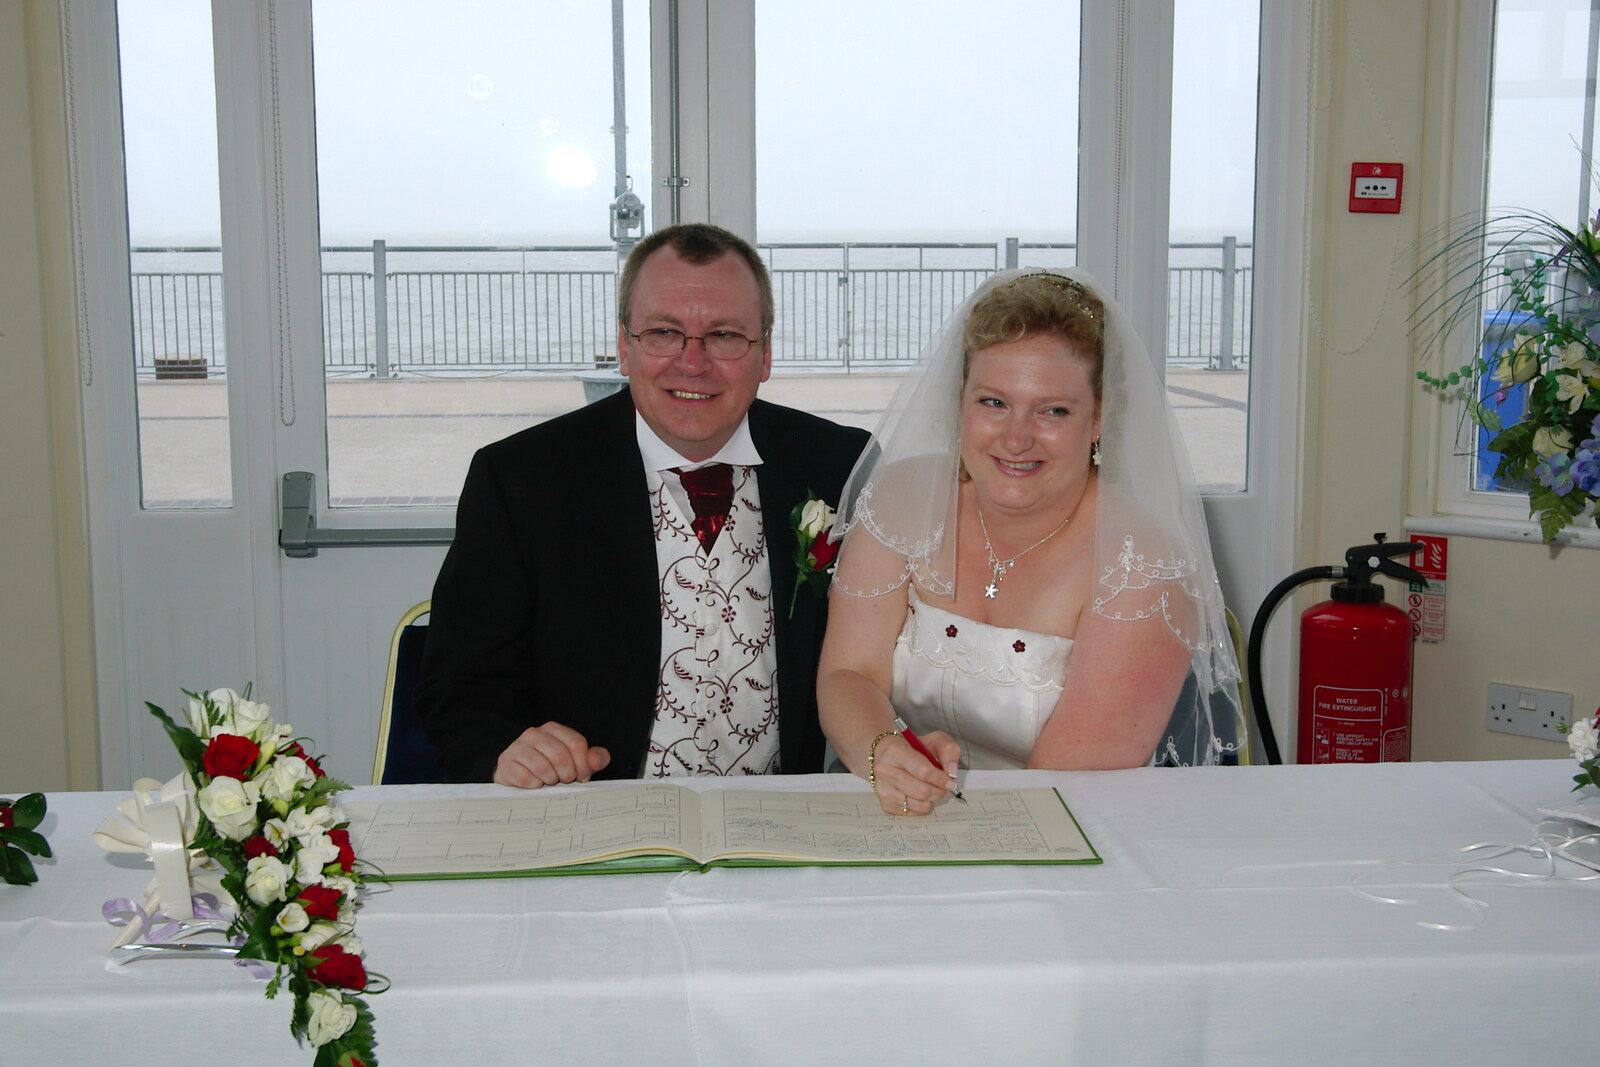 Paul and Sally do the fake signing thing from Sally and Paul's Wedding on the Pier, Southwold, Suffolk - 3rd September 2005